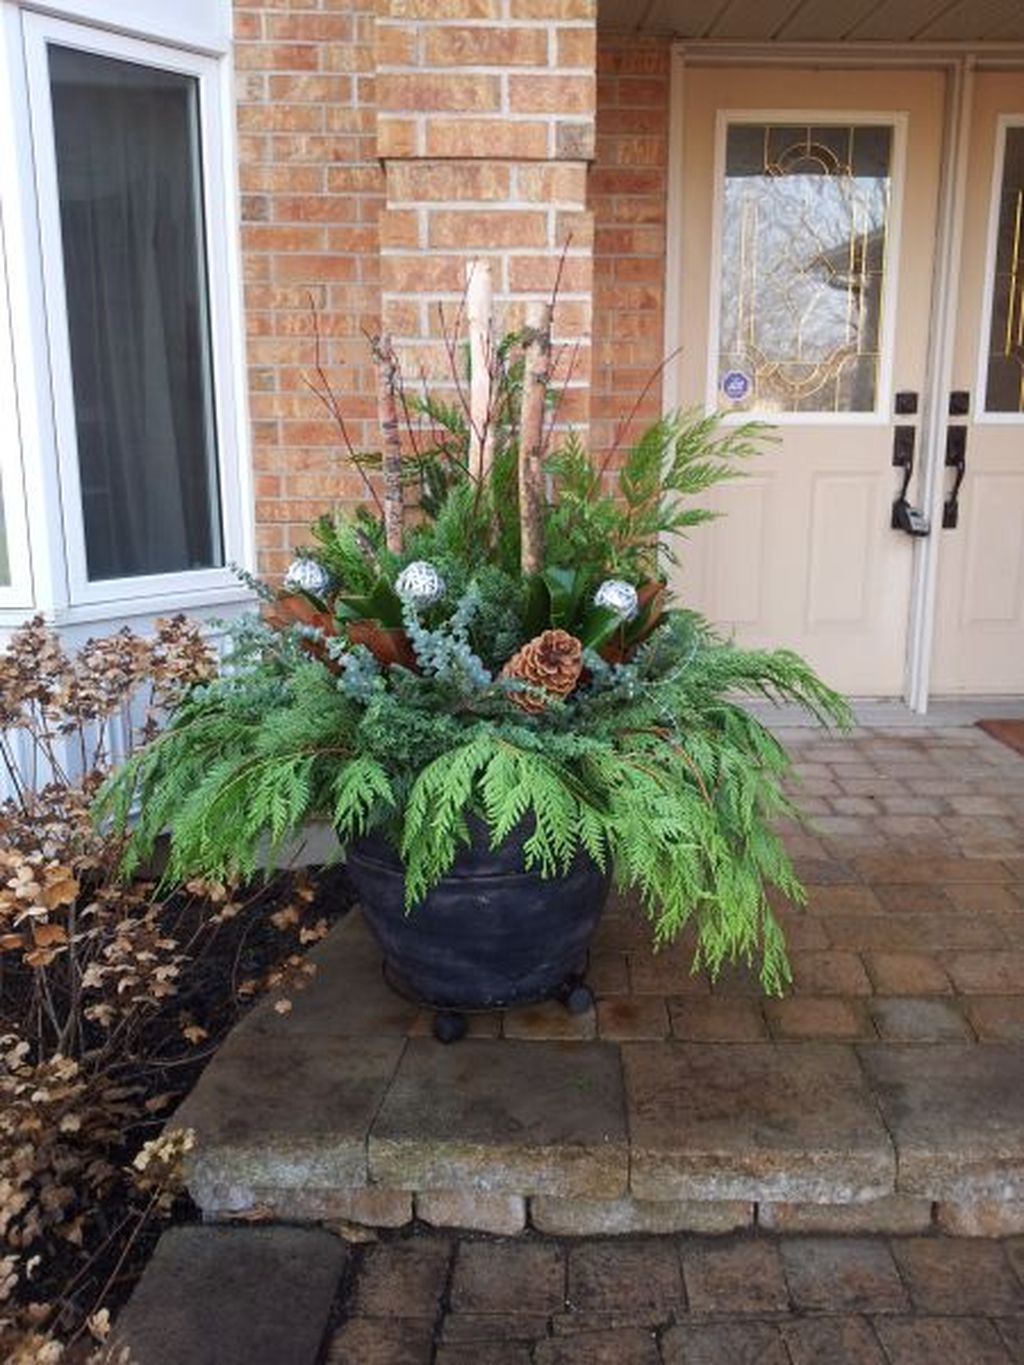 Marvelous Outdoor Holiday Planter Ideas To Beauty Porch Décor 40